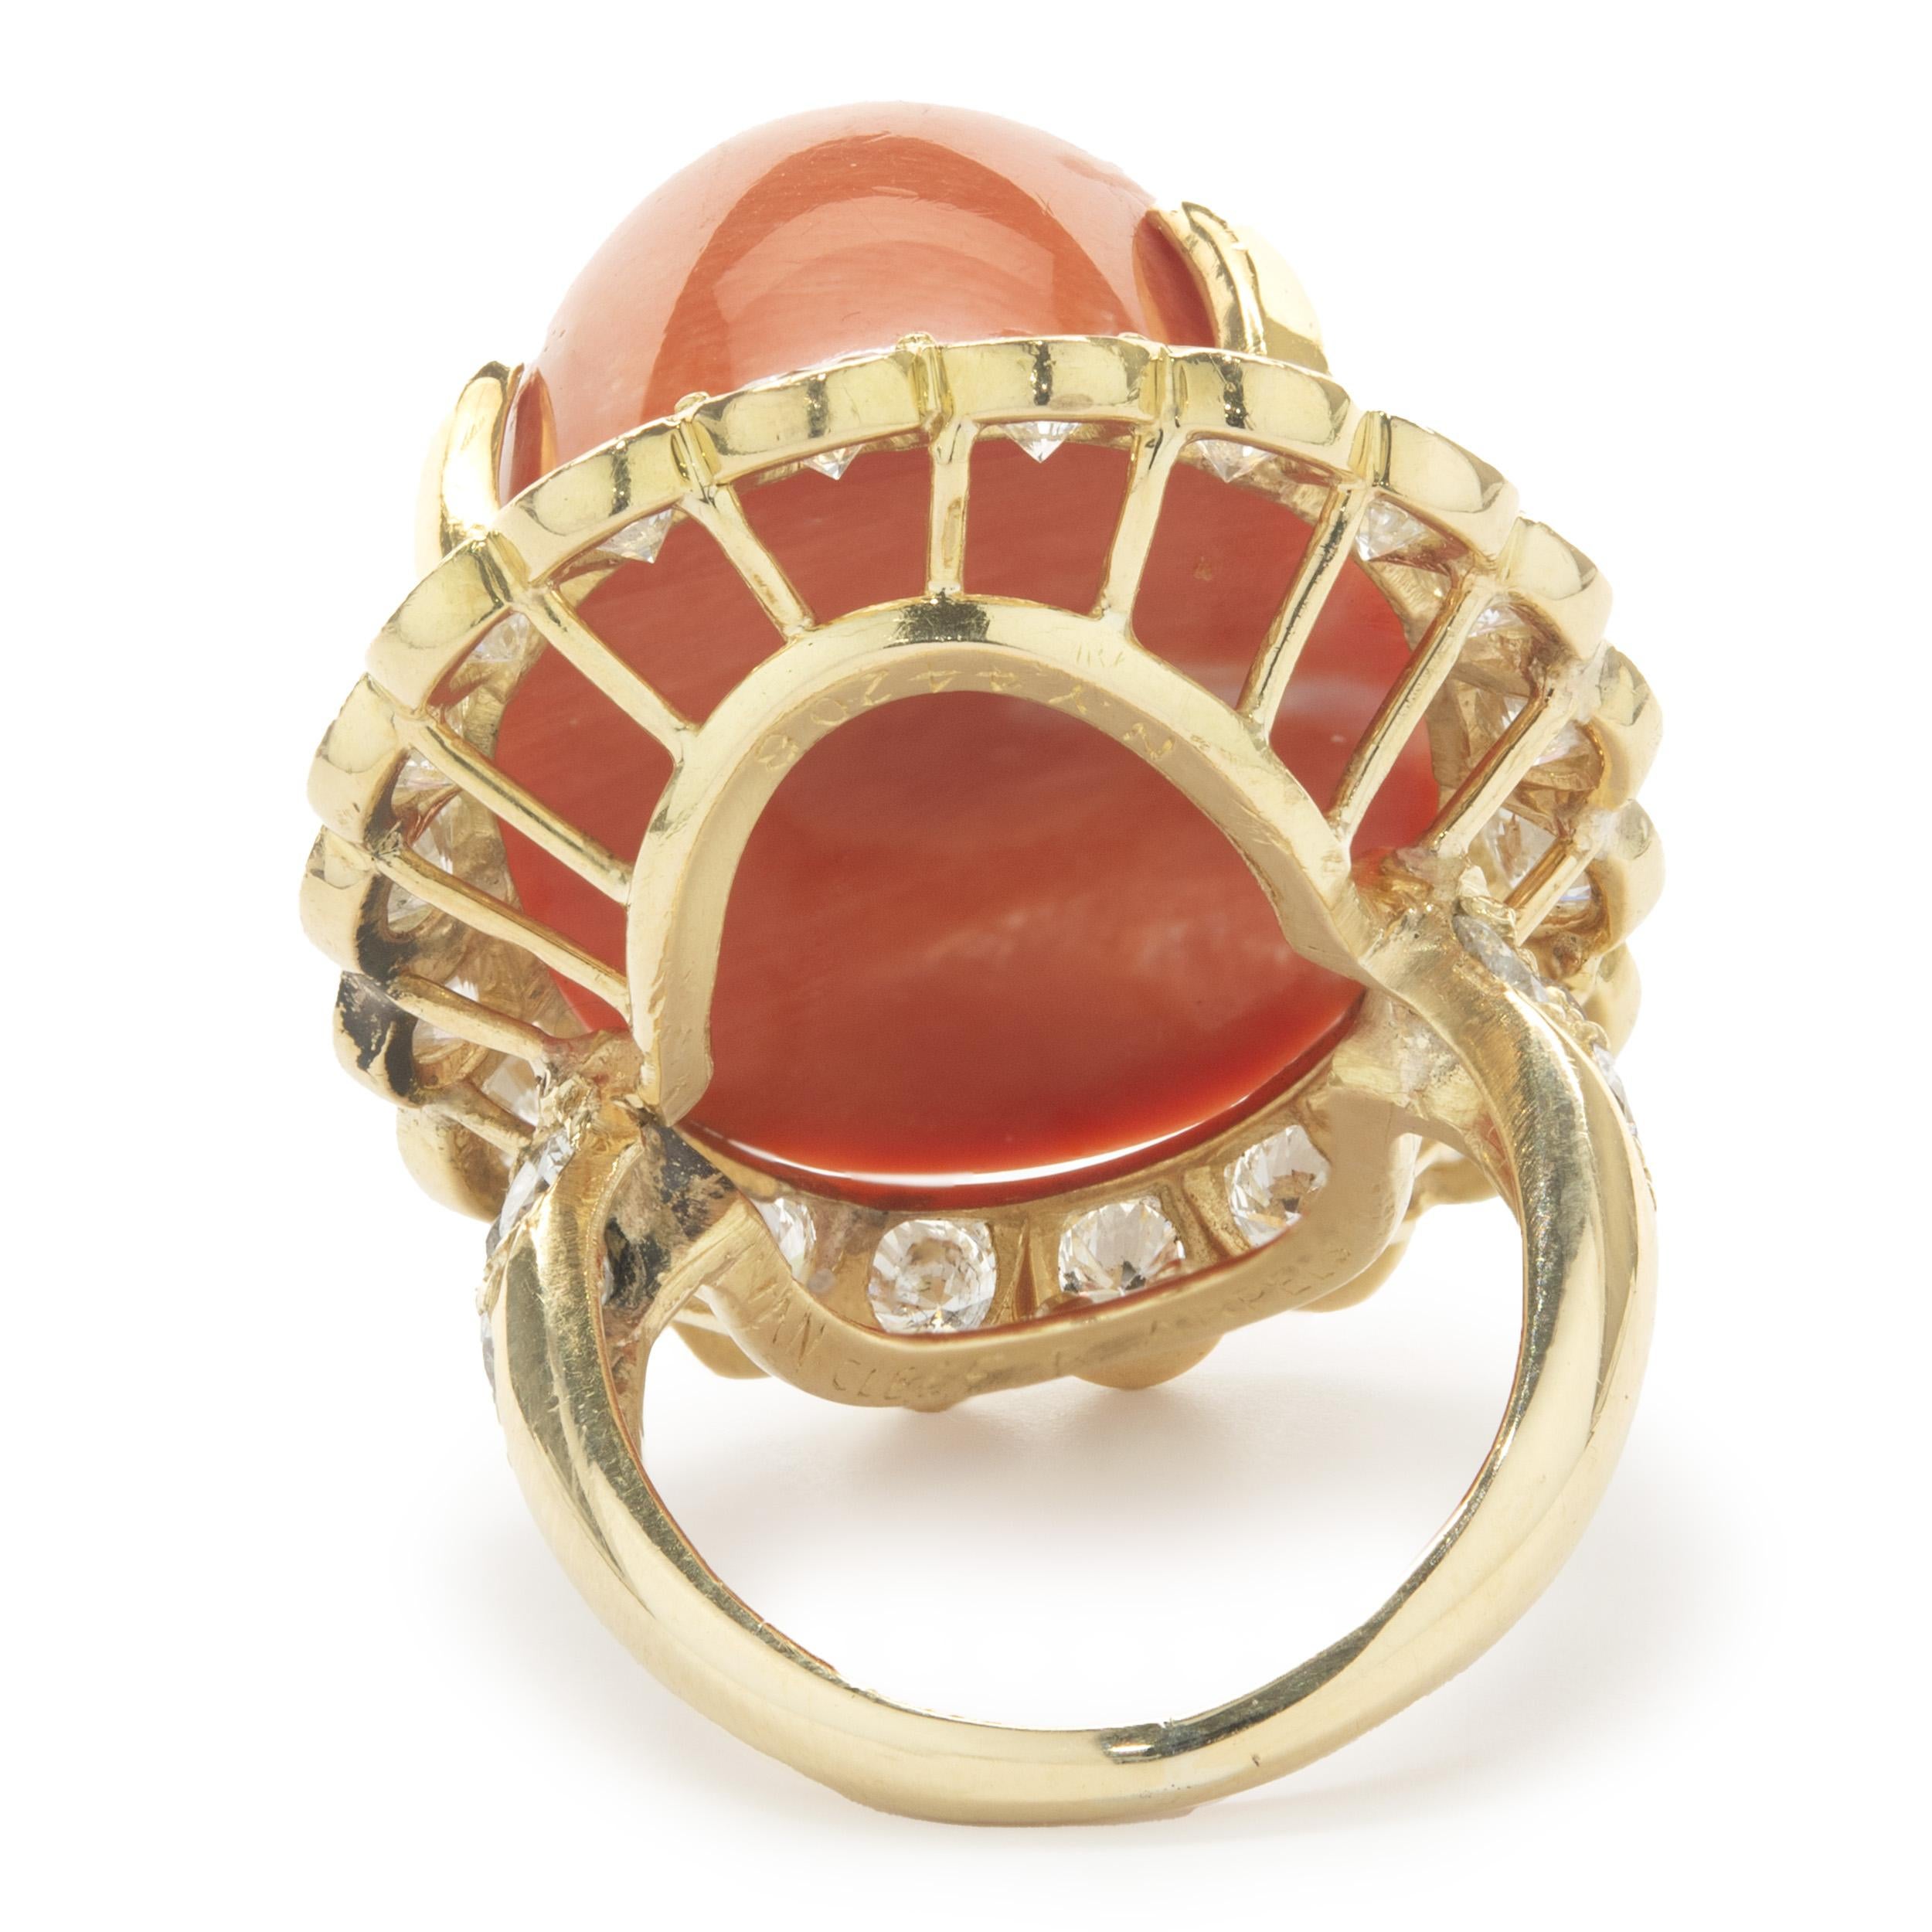 Women's Van Cleef & Arpels 18 Karat Yellow Gold Vintage Coral Cabochon and Diamond Ring For Sale